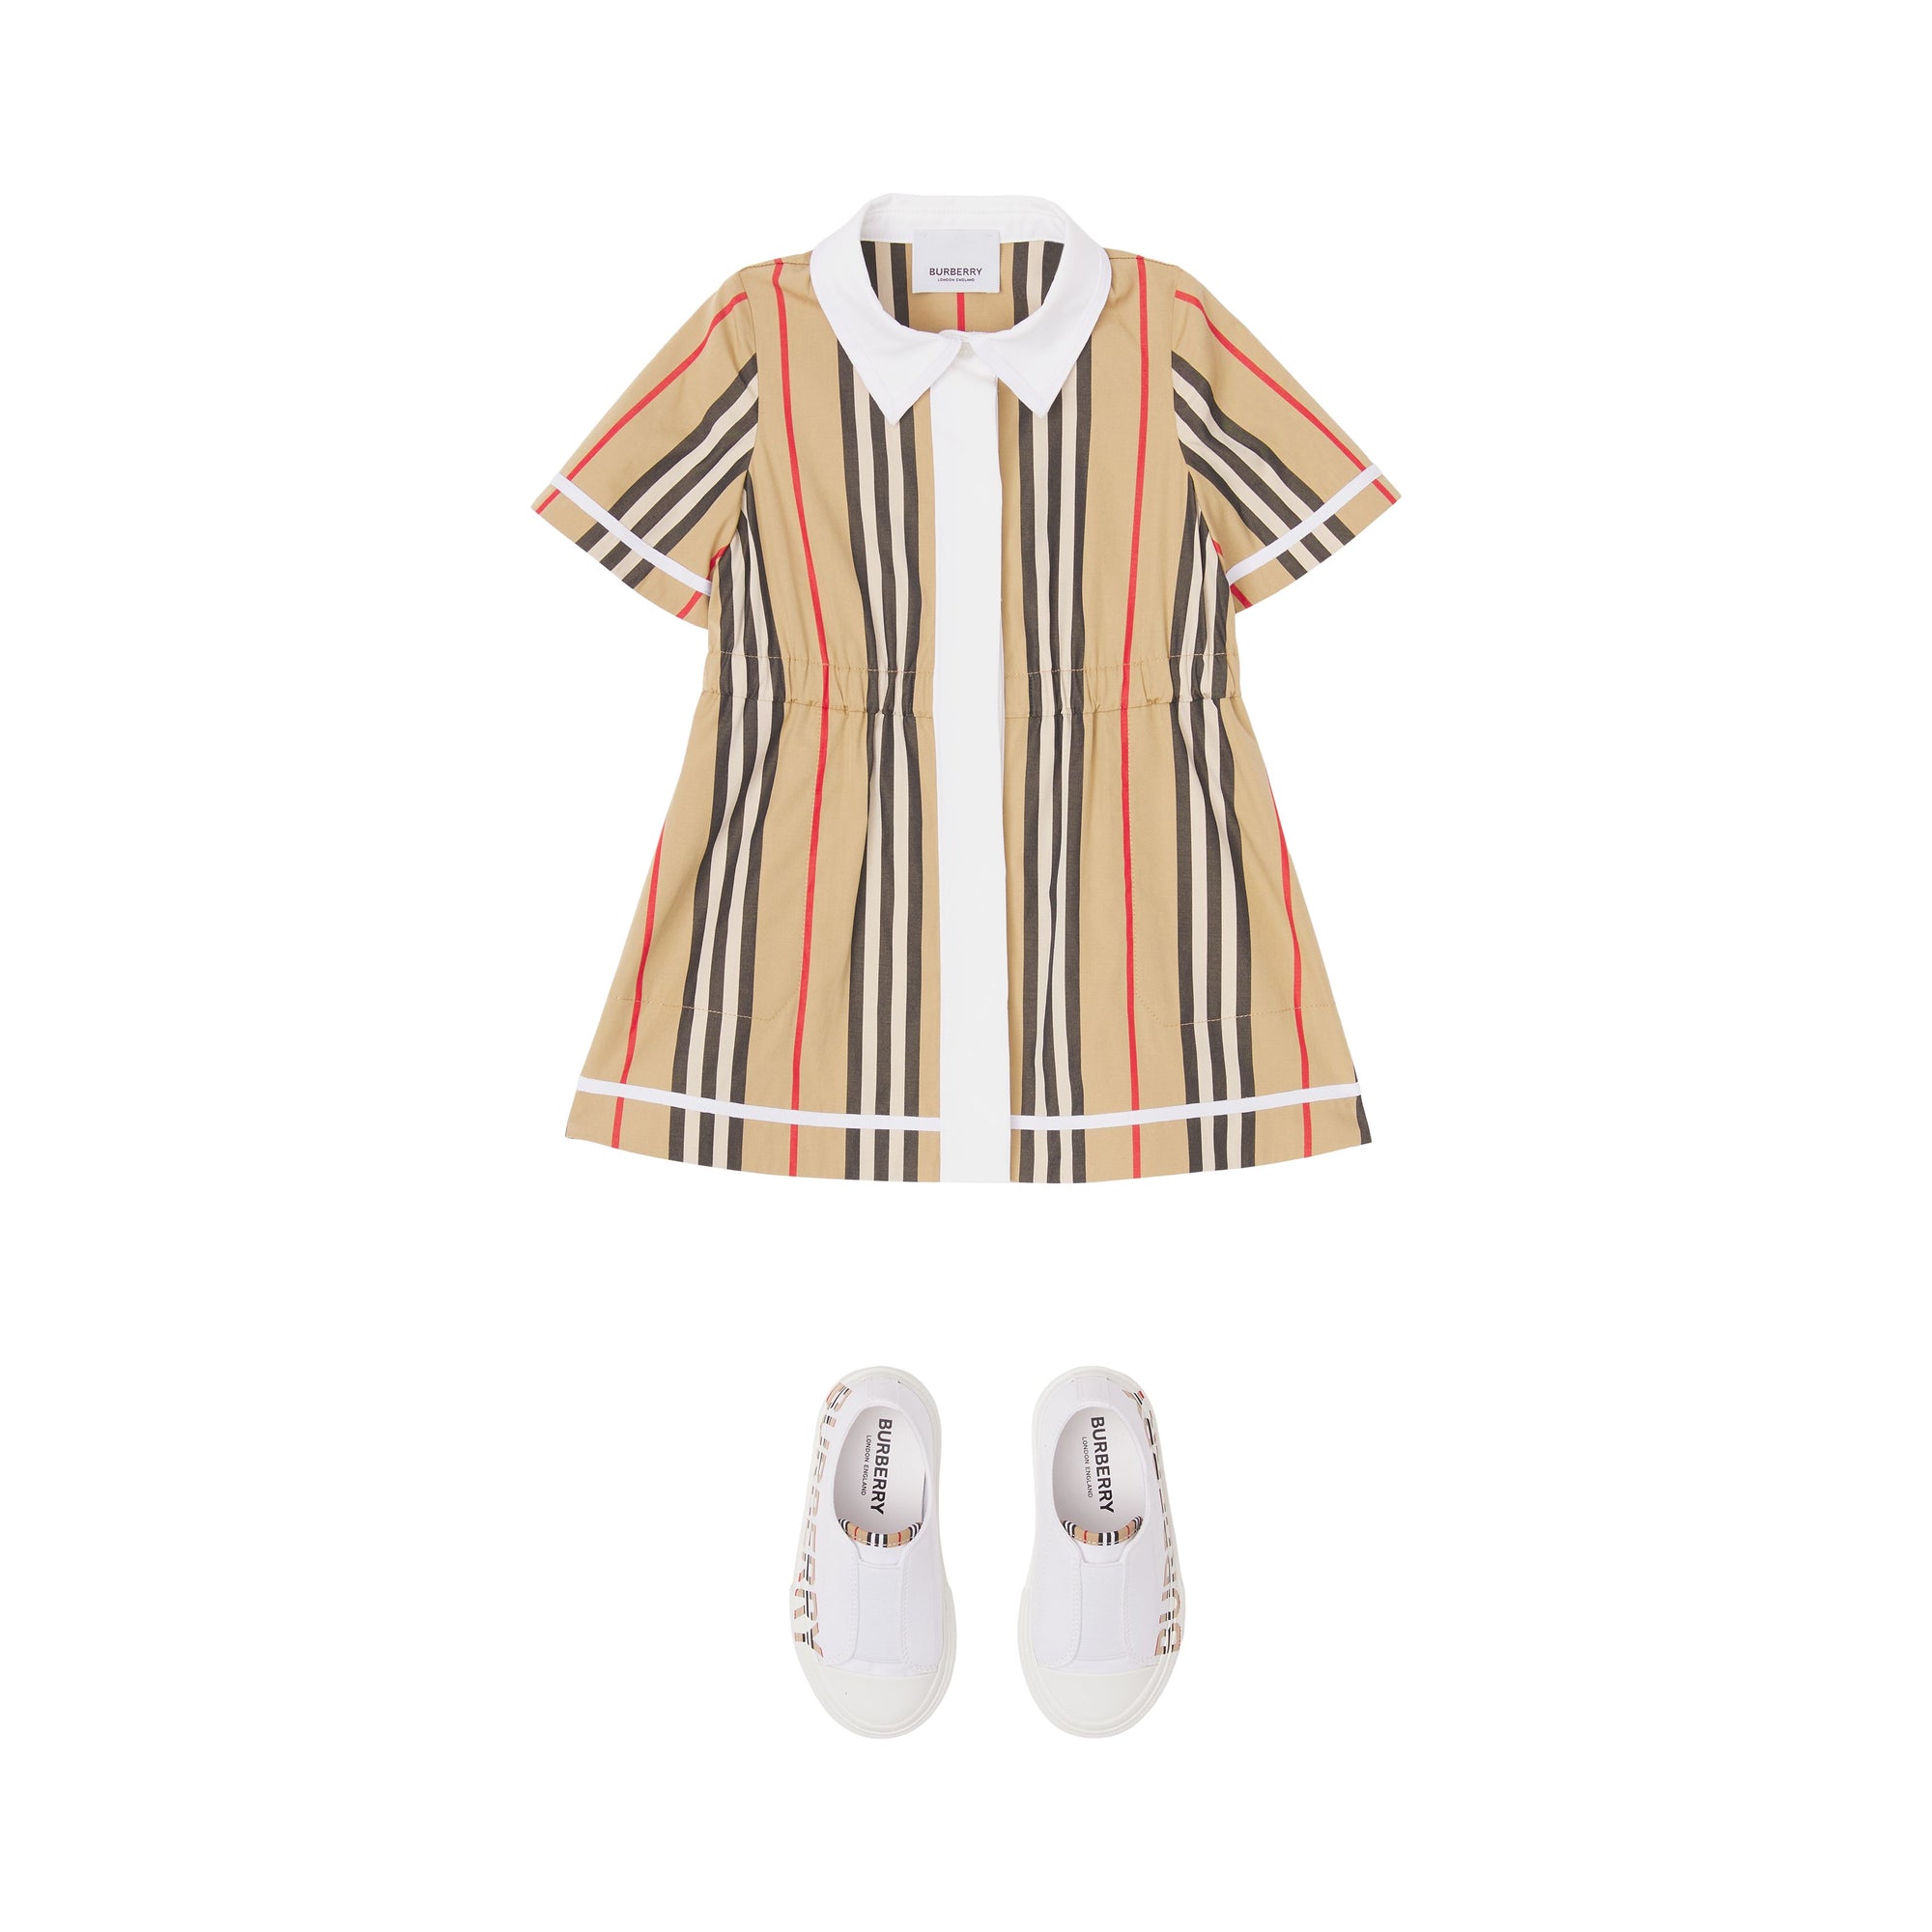 ARCHIVE BEIGE IP S Childrens INF GIRL DRESSES